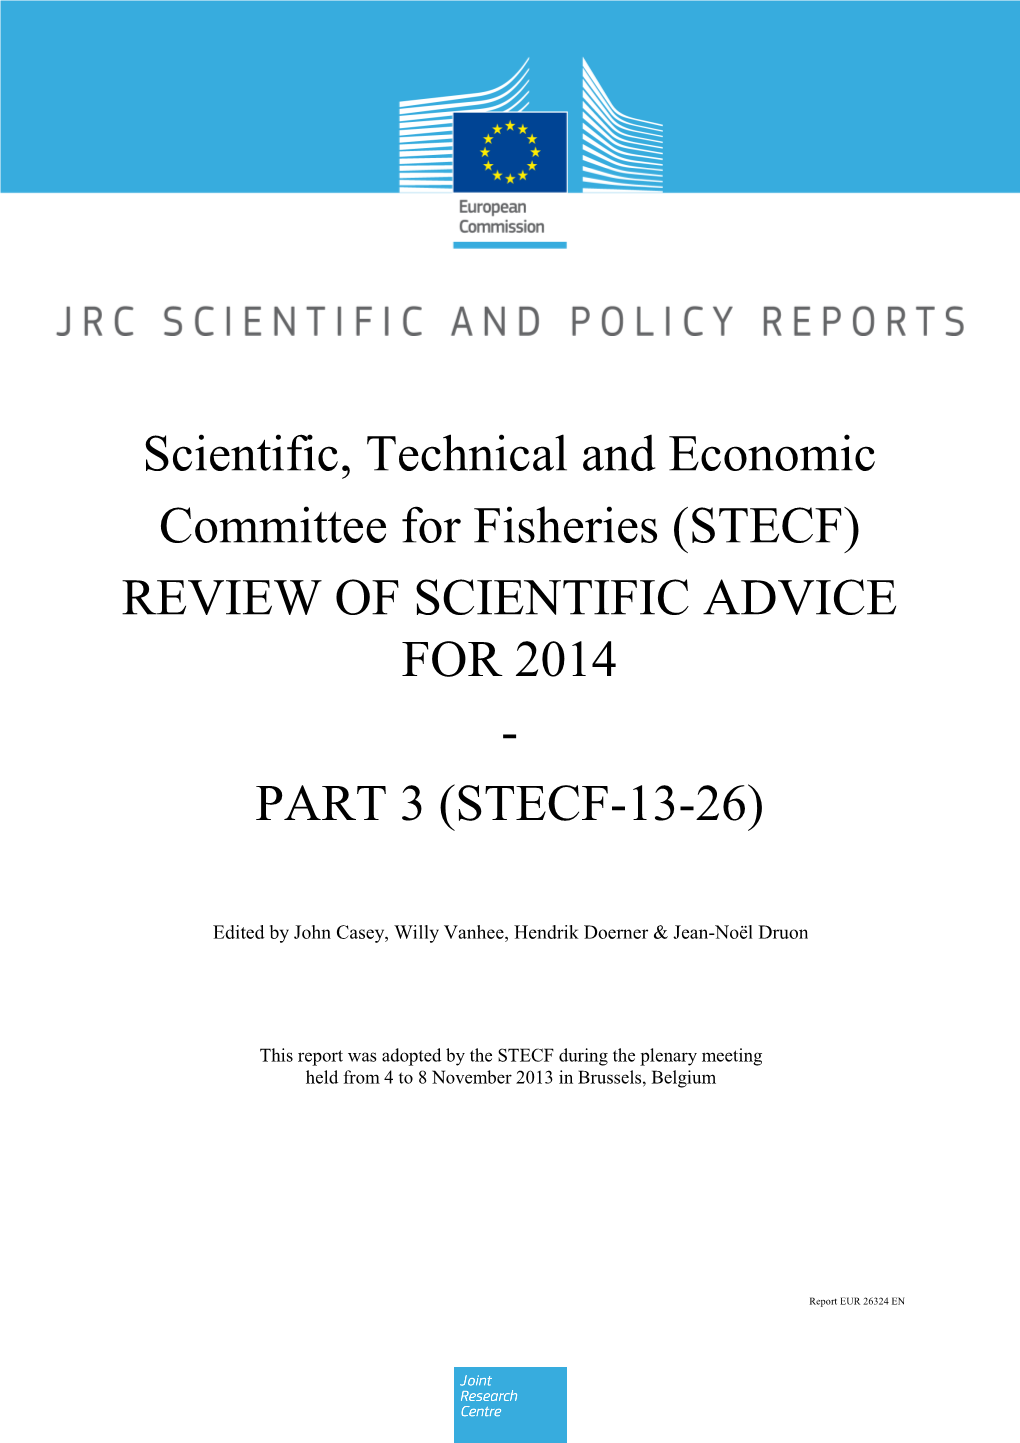 STECF-EWG 13-14 Review of Advice for 2014 Part 3 JRC86110